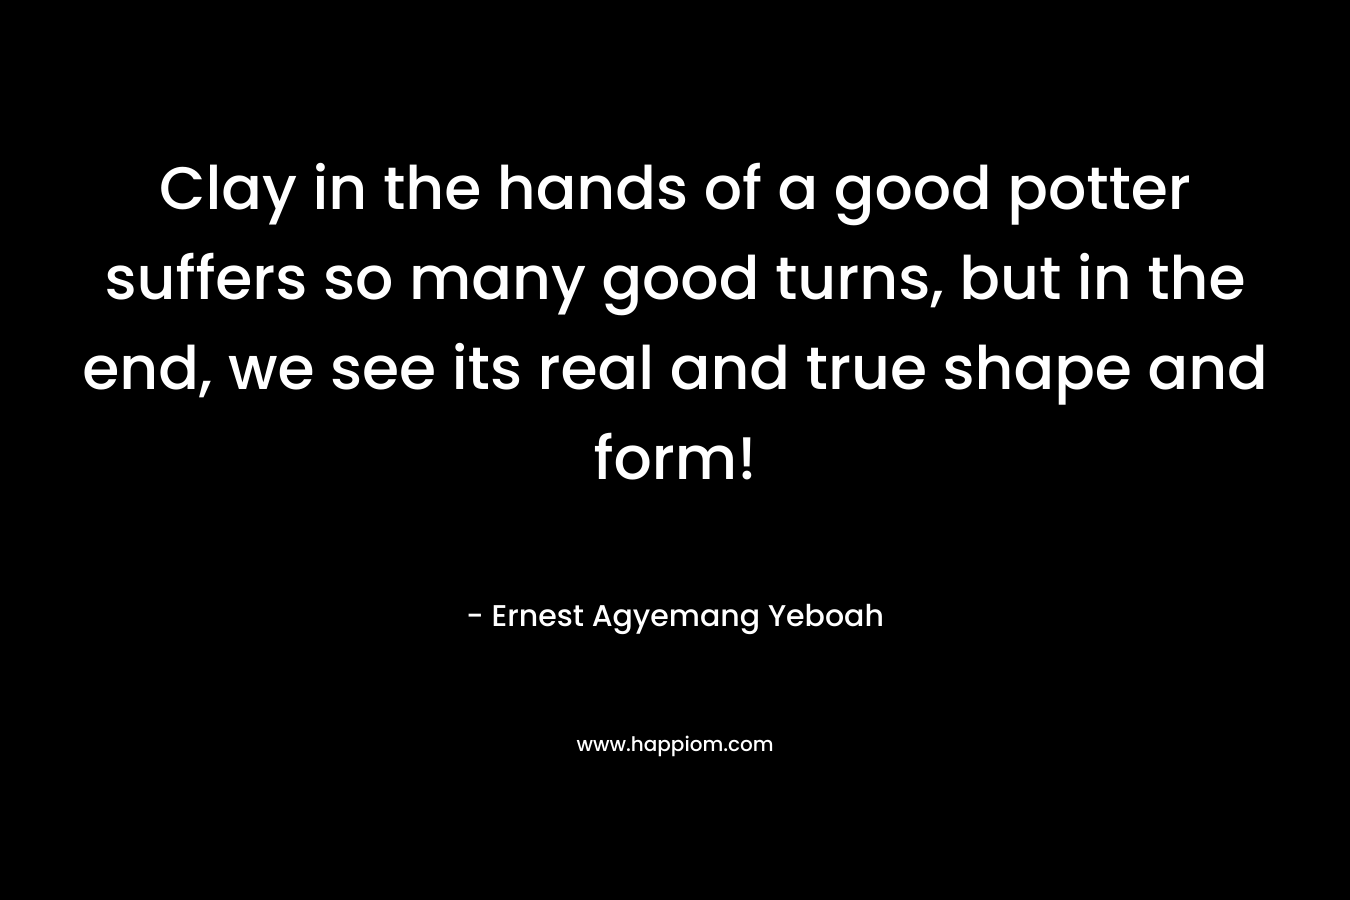 Clay in the hands of a good potter suffers so many good turns, but in the end, we see its real and true shape and form! – Ernest Agyemang Yeboah